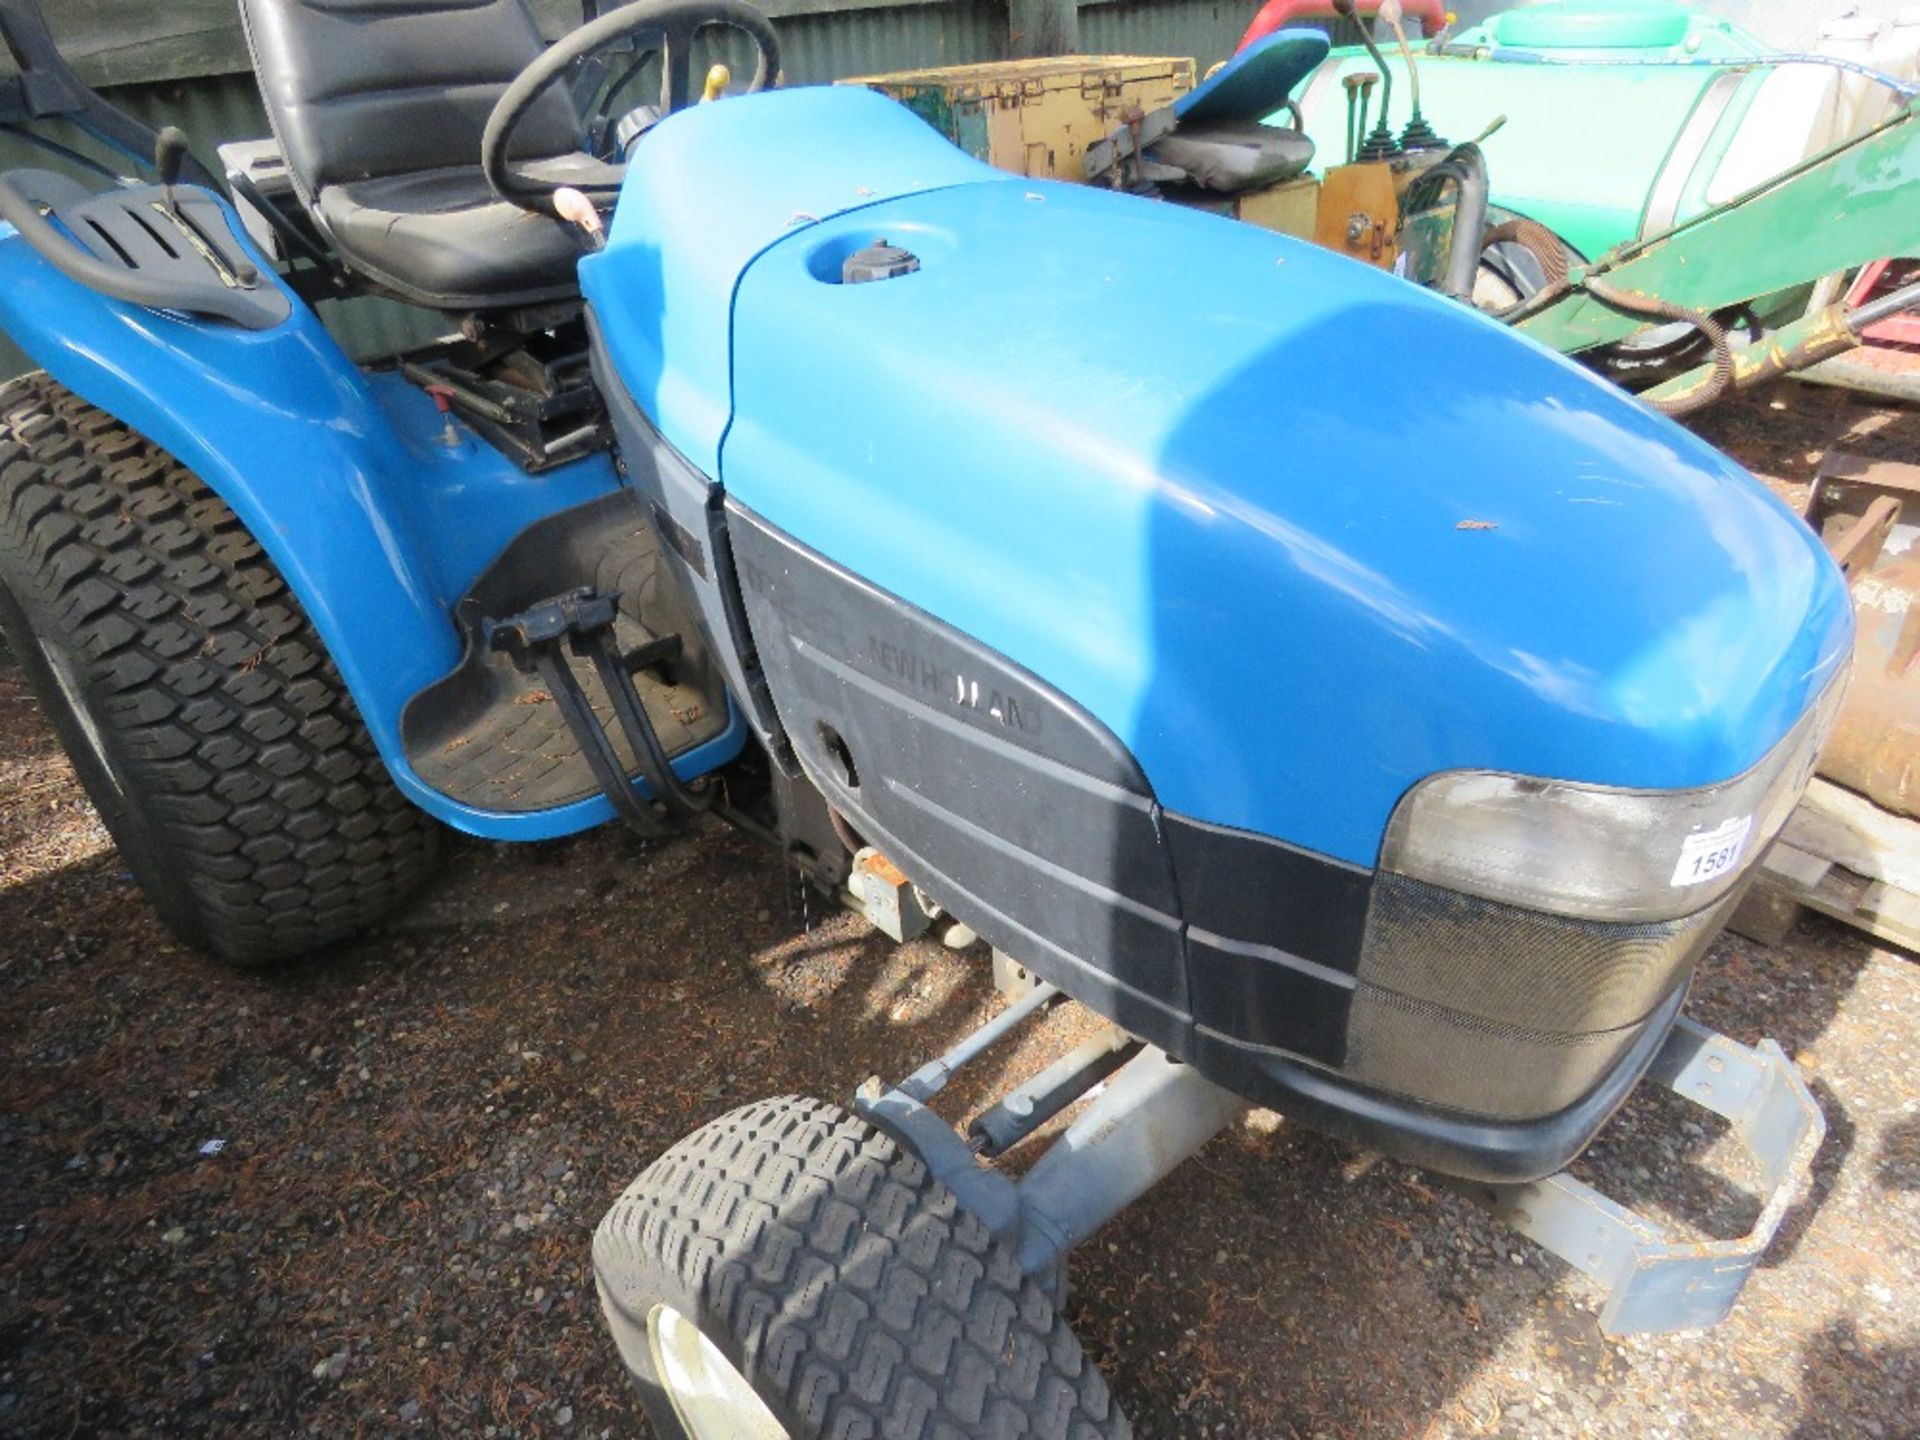 NEW HOLLAND TC29D 24D TRACTOR WITH GRASS TYRES, 3013 REC HOURS. WHEN TESTED WAS SEEN TO DRIVE, STEER - Image 2 of 6